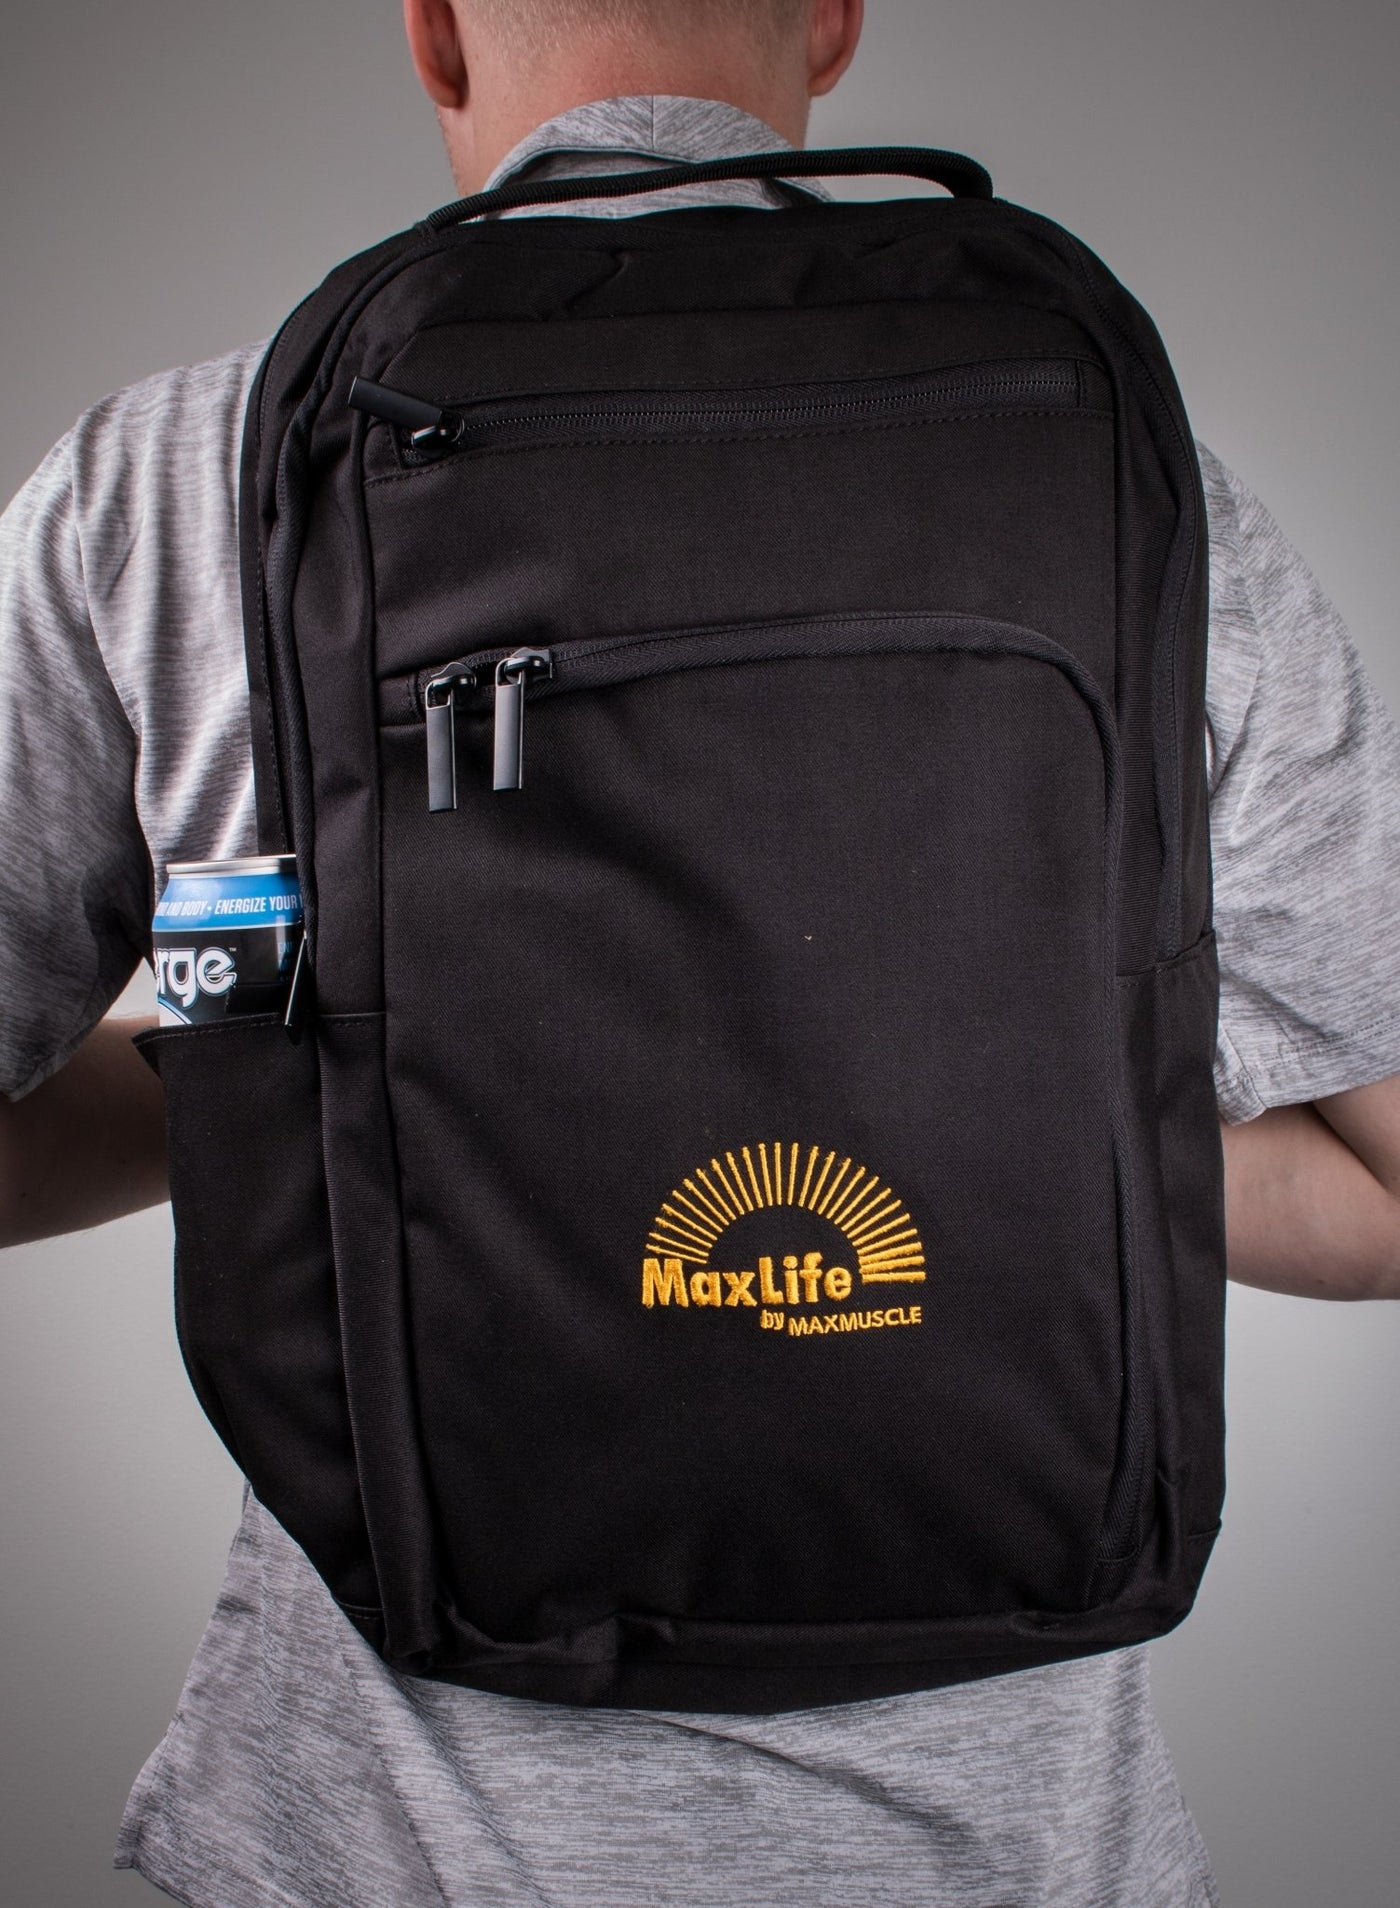 MaxLife BackPack - Max Muscle Nutrition